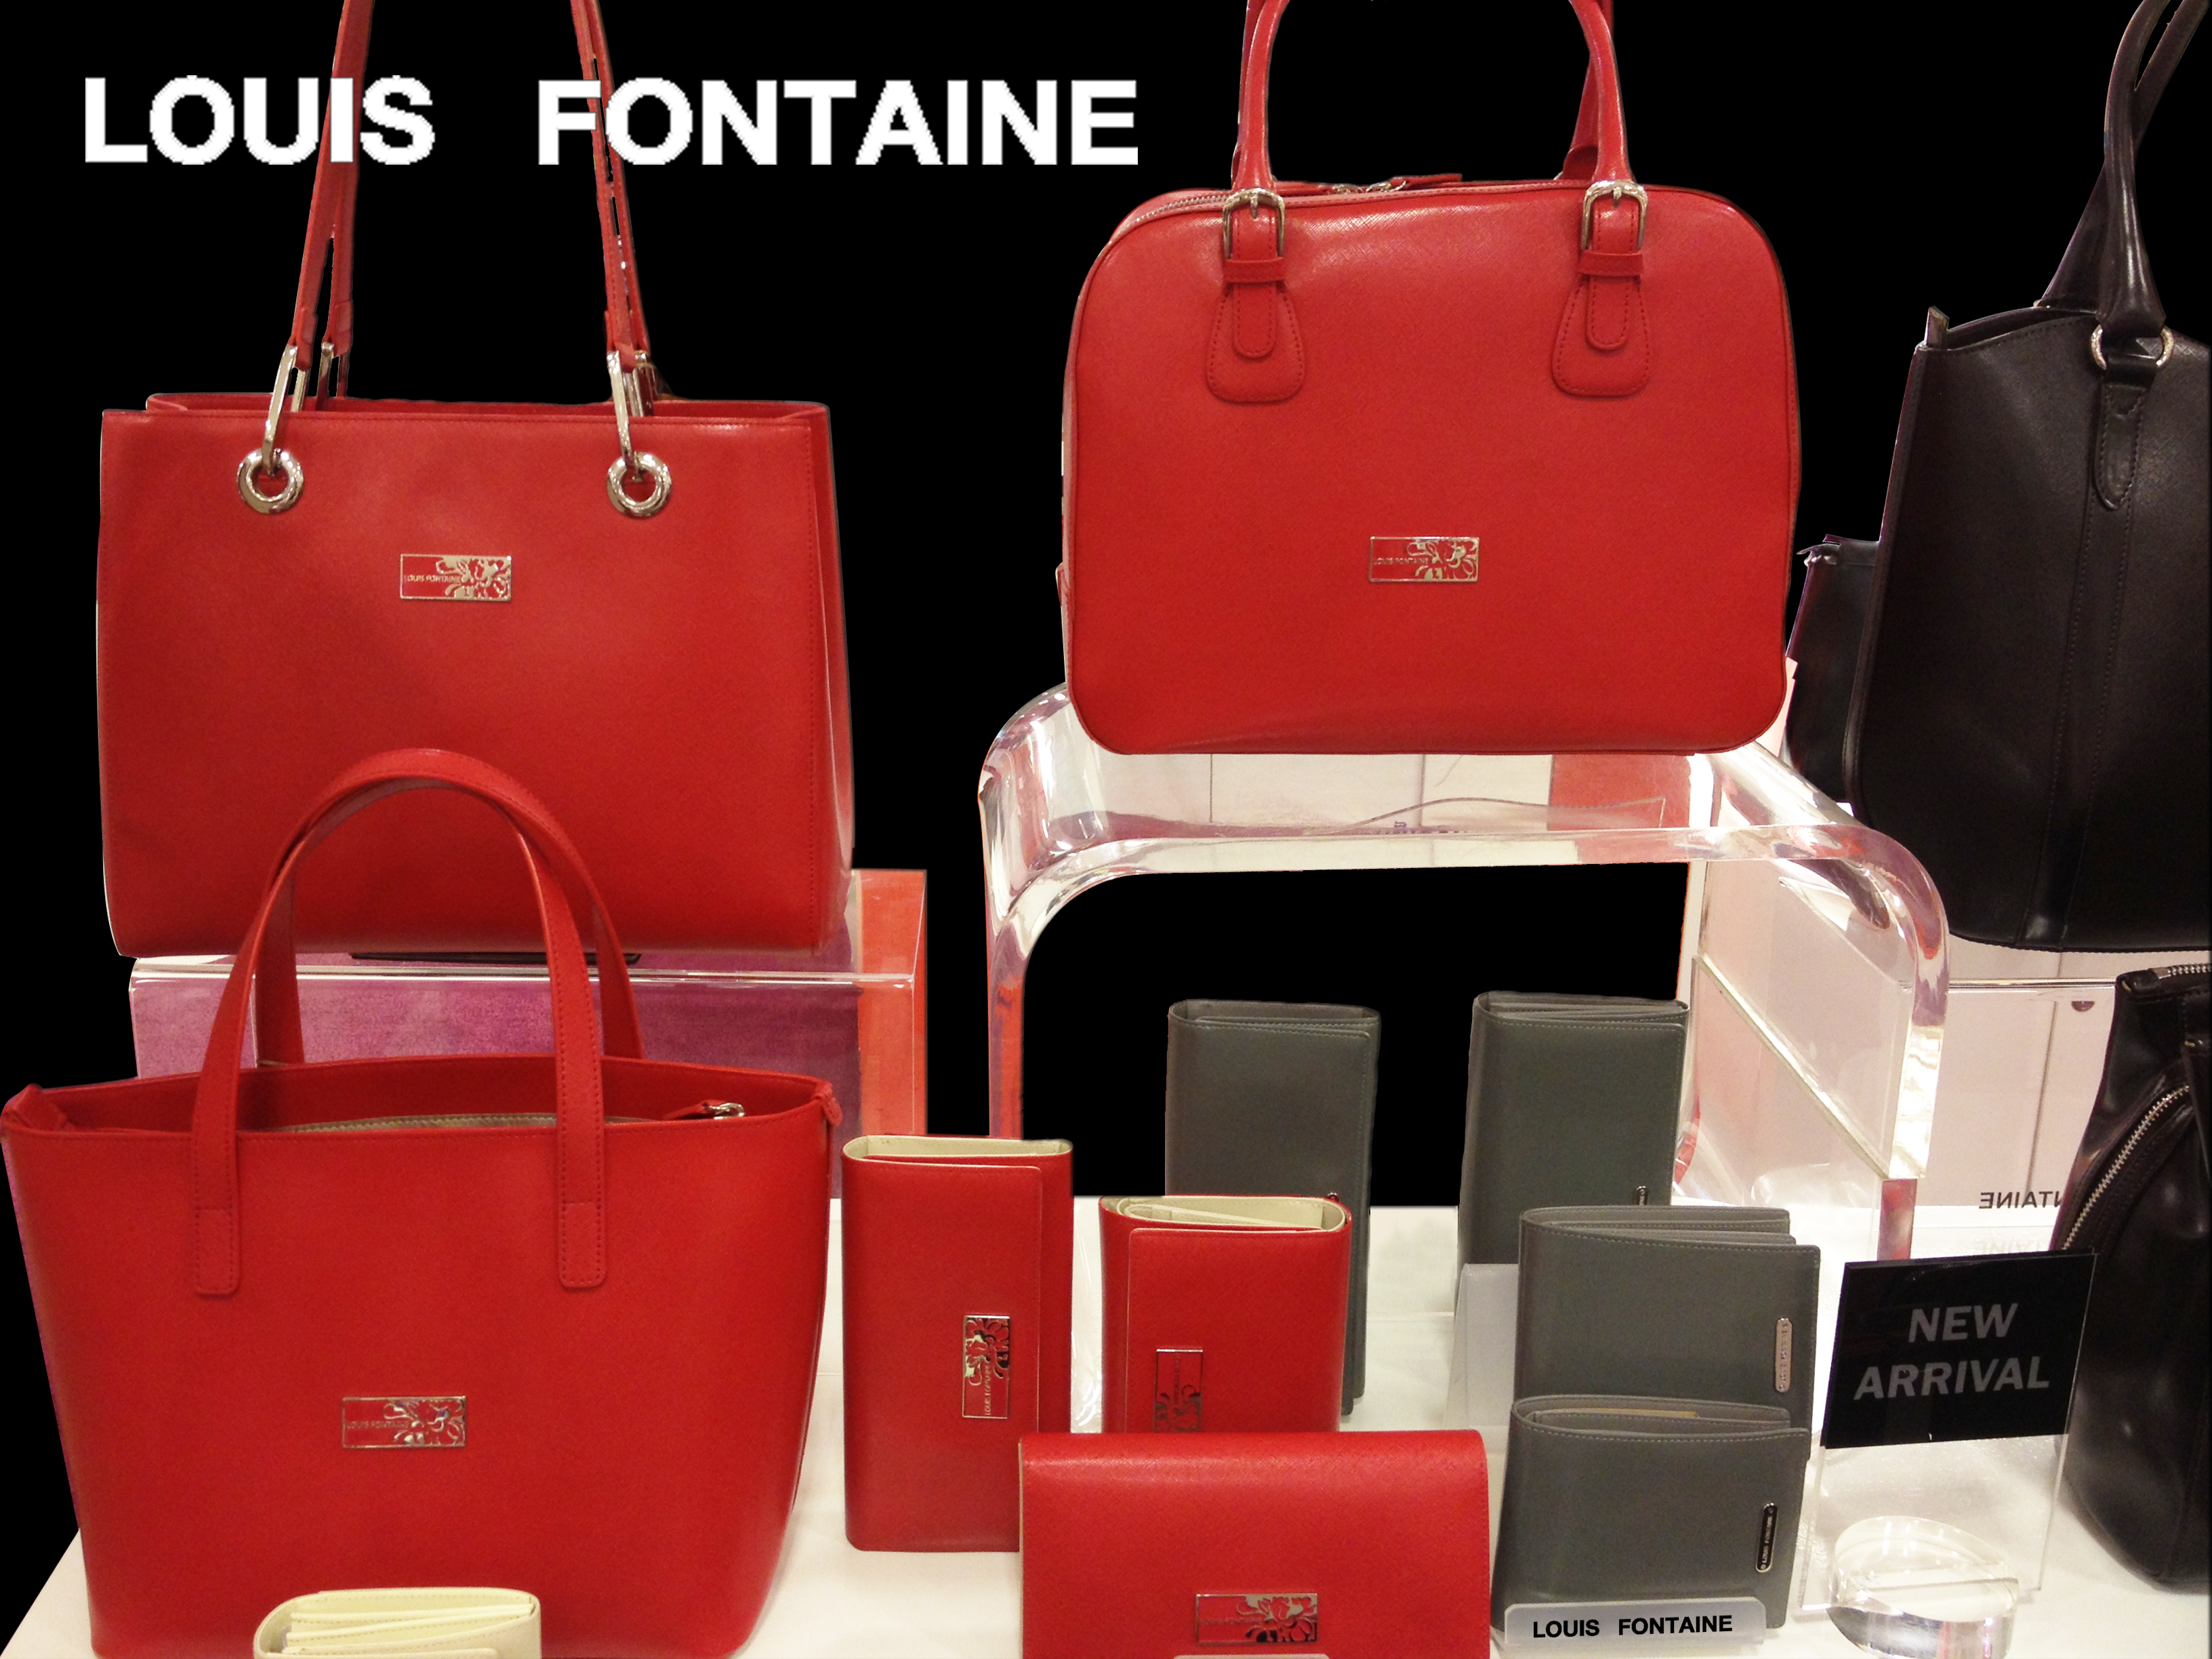 LOUIS FONTAINE: CONNER AT THE MALL BANGKAE – Louis Fontaine Leather Goods